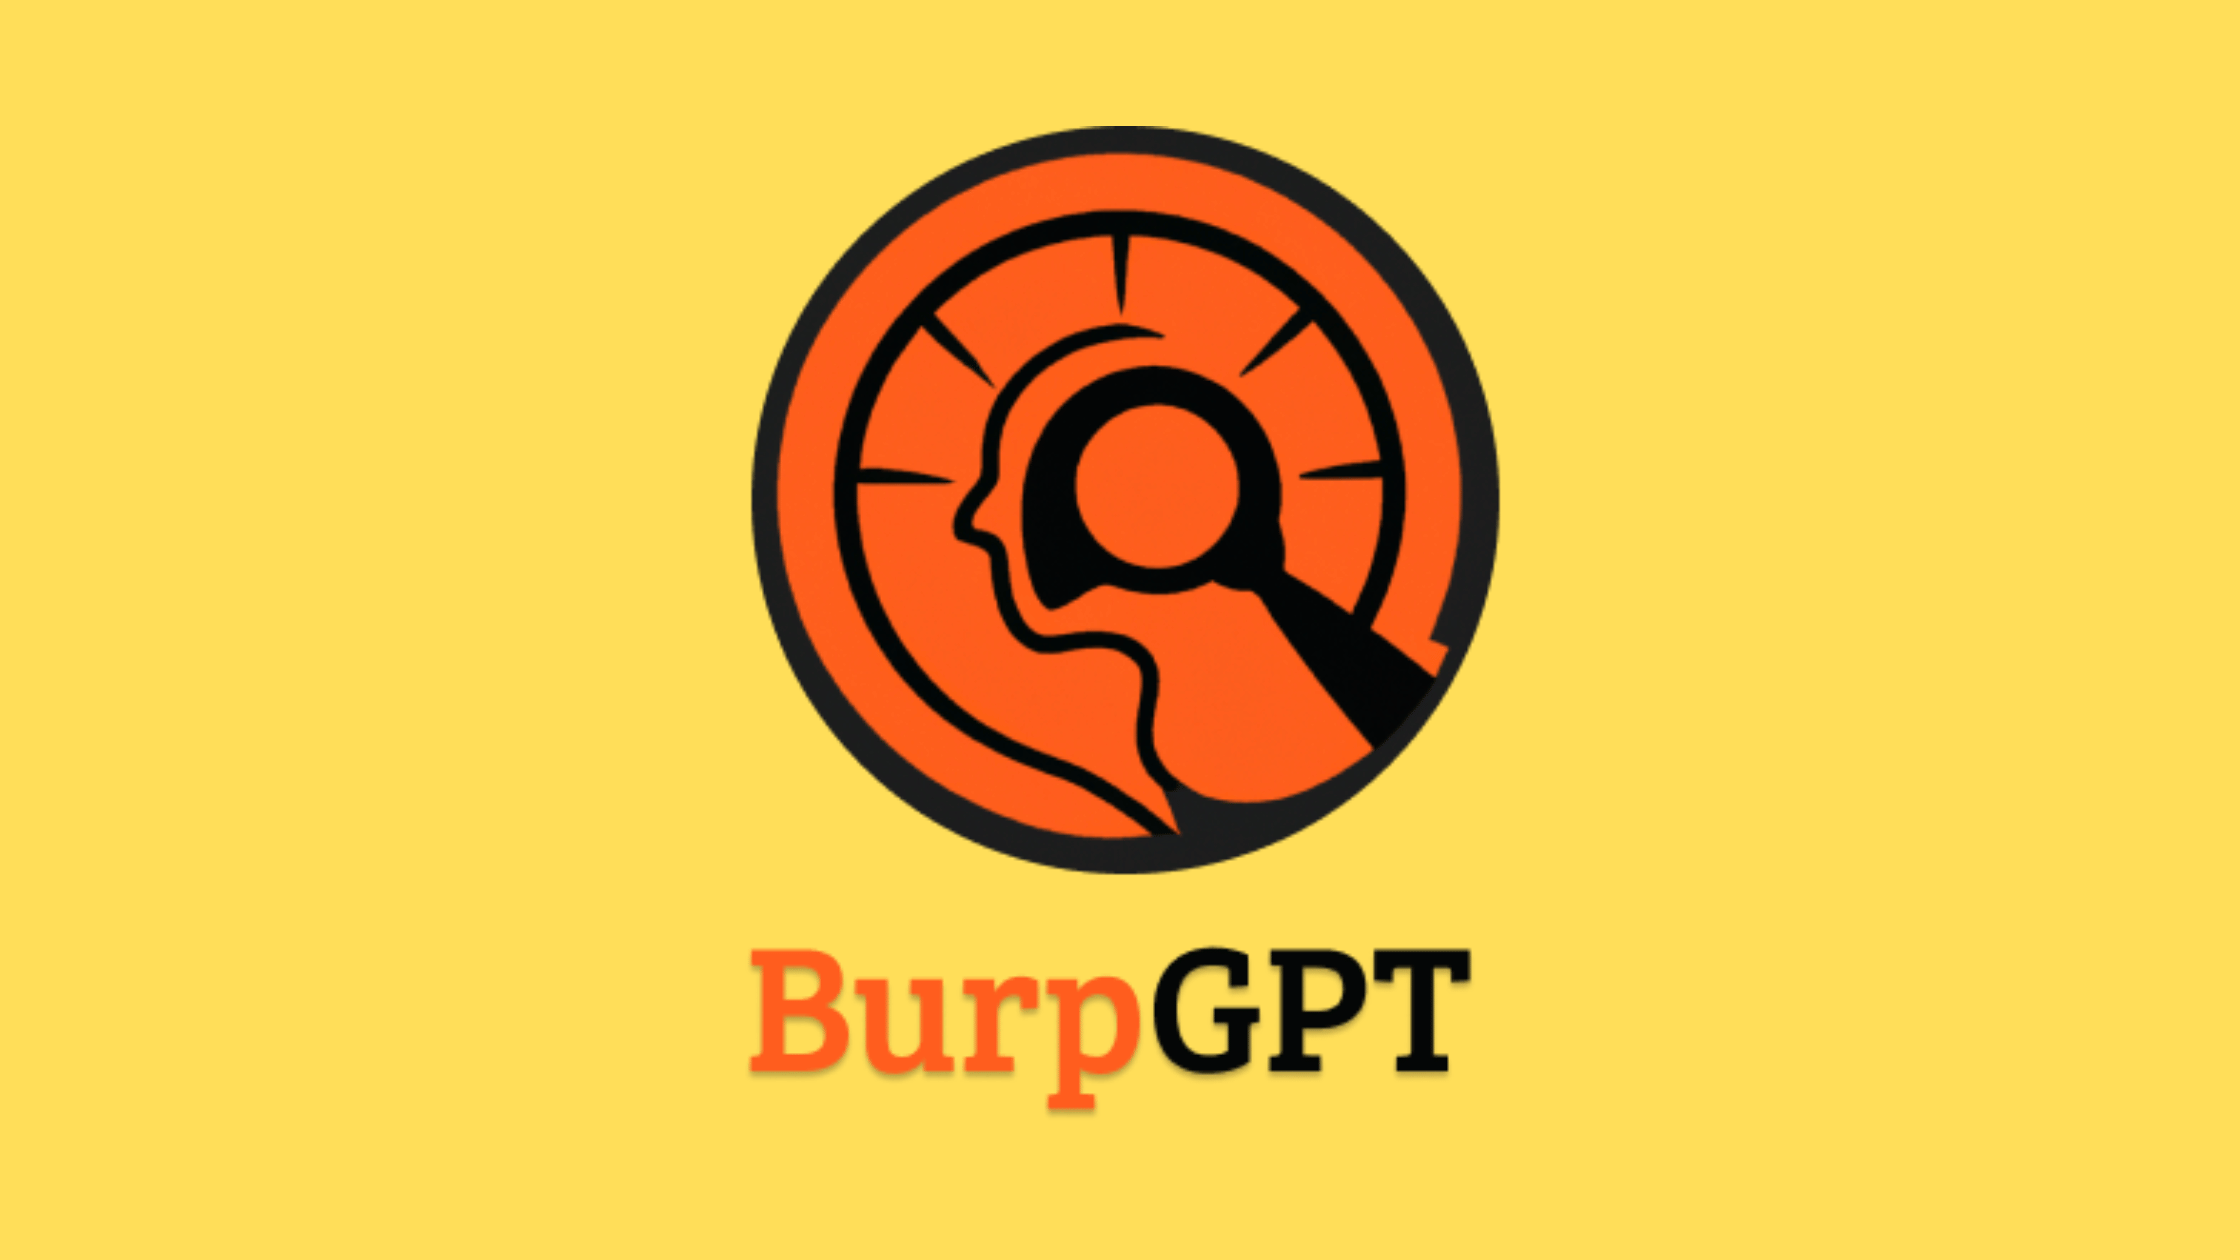 Logo of BurpGPT against a yellow background, combining a magnifying glass and gear symbol to represent security analysis.